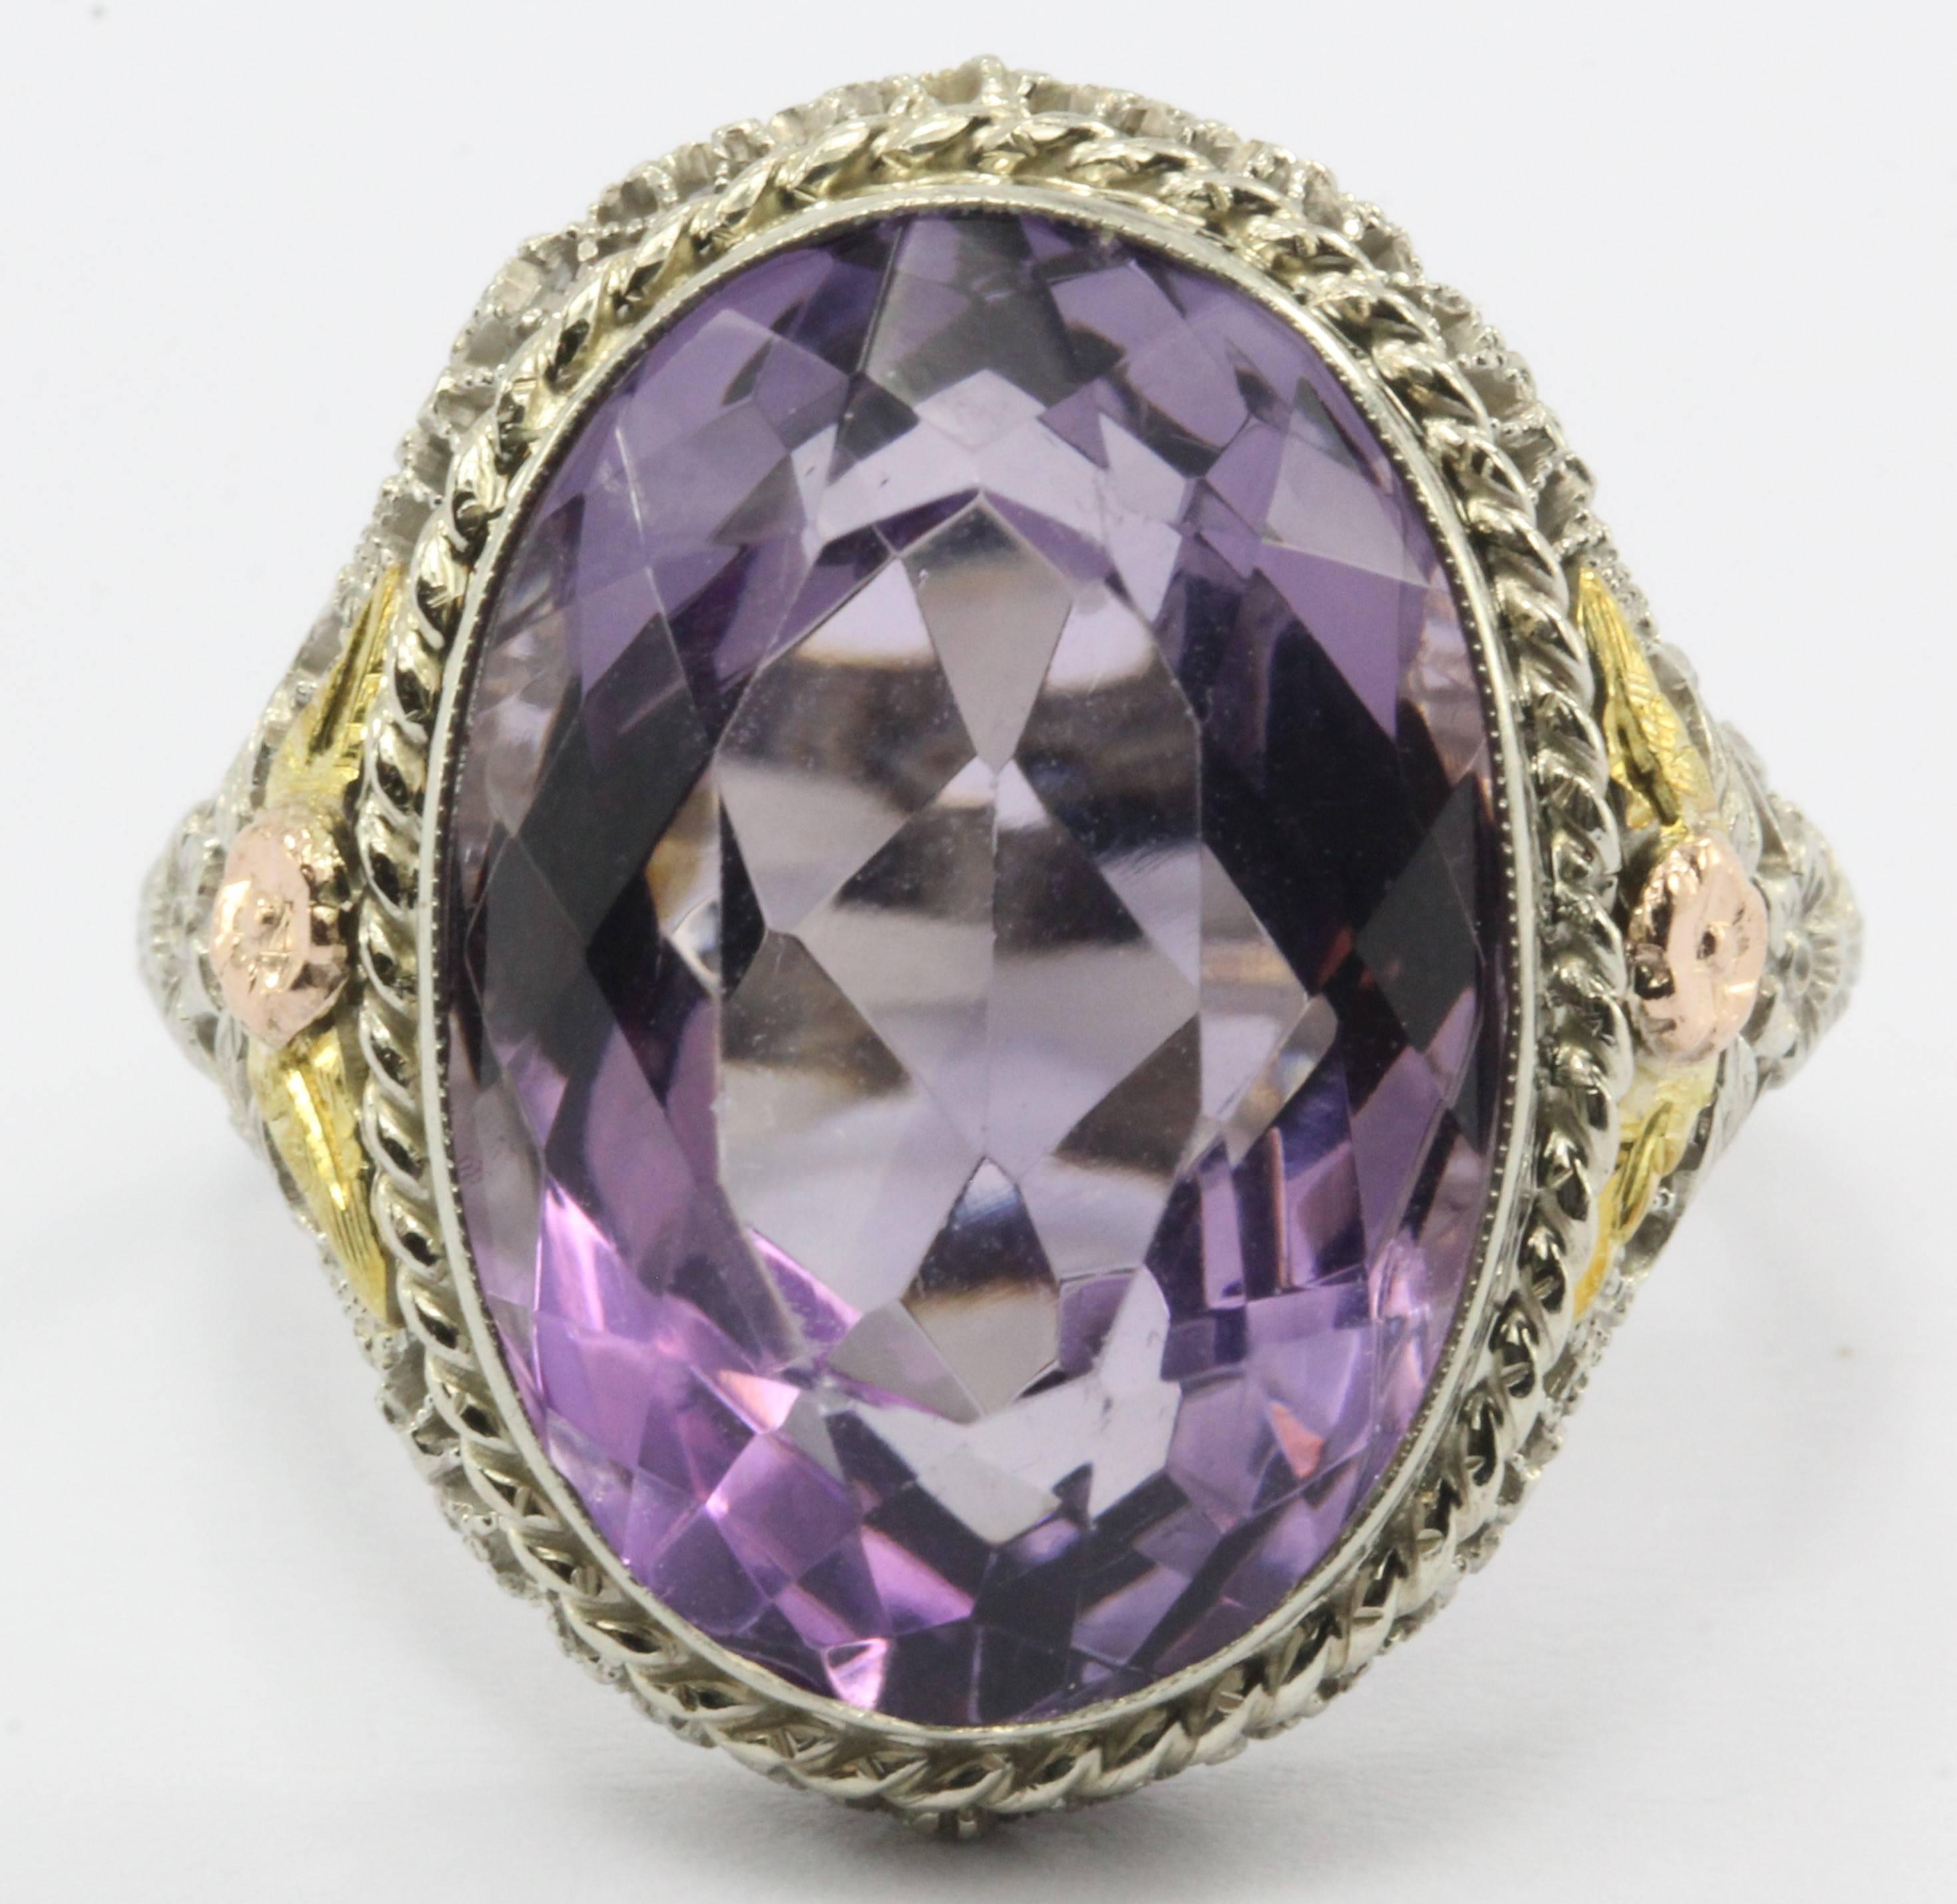 At once both bold and intricate, this impressive amethyst ring is Victorian revival in style and dates from the 1960s.

The large amethyst is approximately 11 carats (18.2mm x 12.85mm x 8.9mm) and is set in a 14k white gold filigree setting.

A